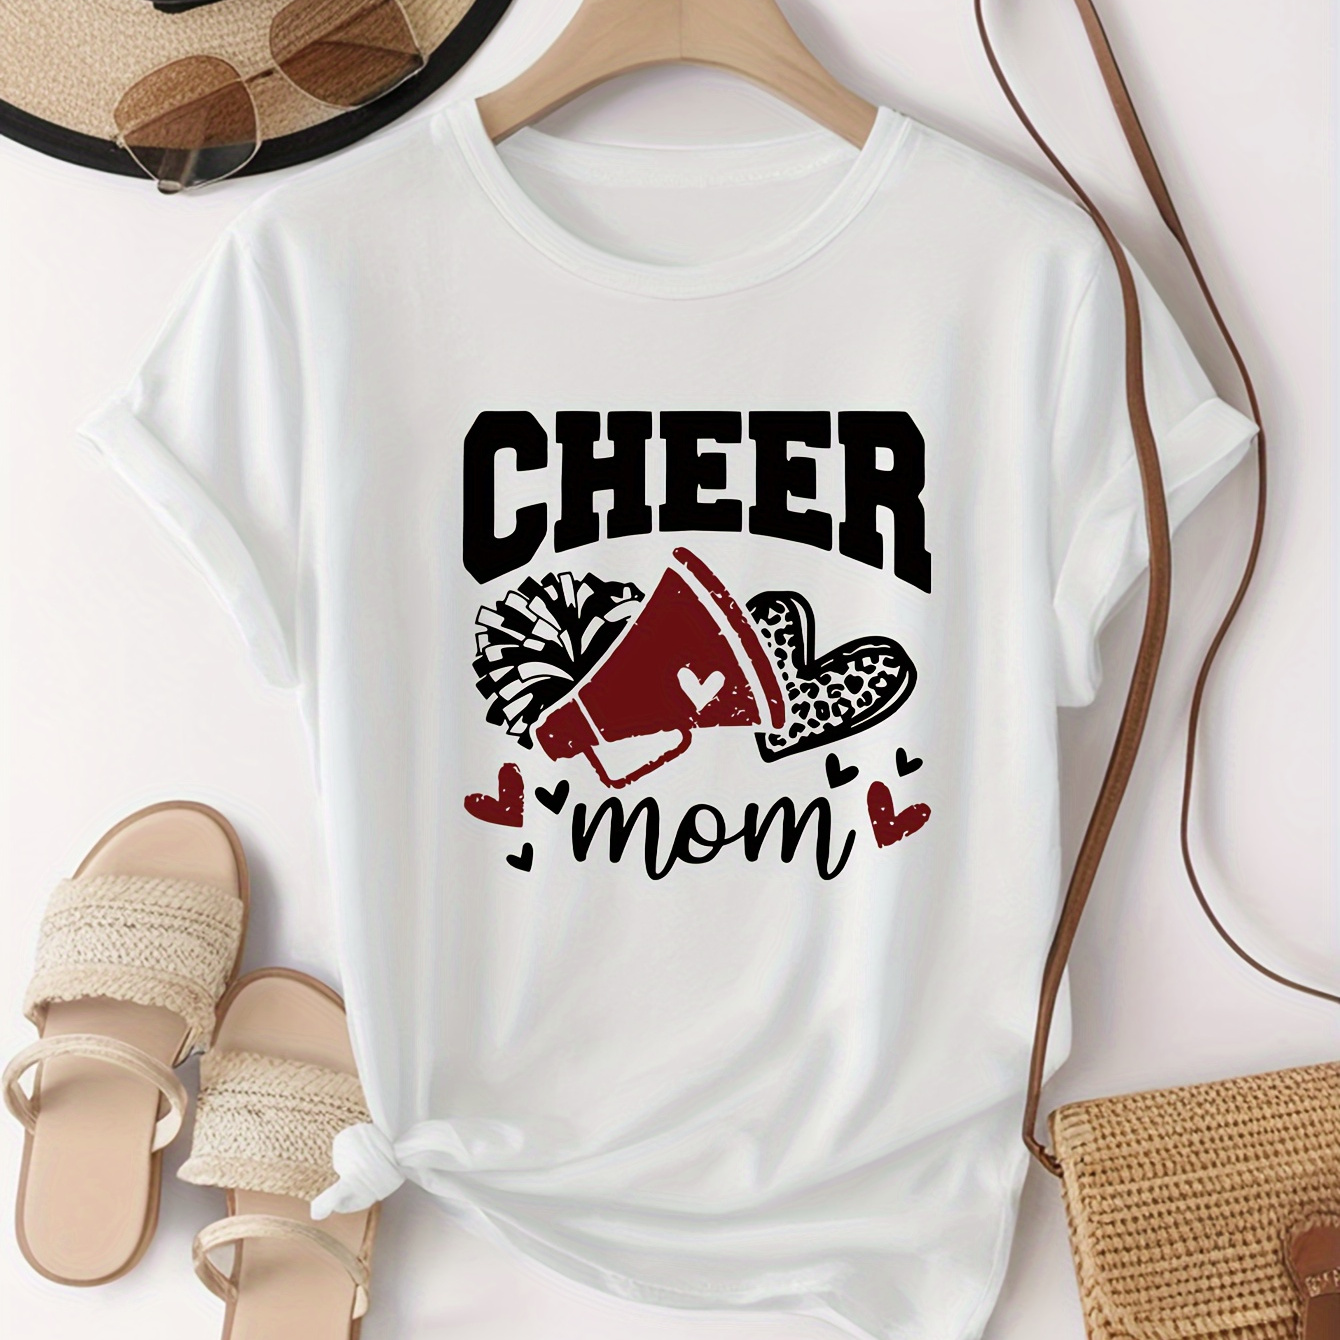 

Plus Size Heart & Letter Cheer Print T-shirt, Casual Crew Neck Short Sleeve T-shirt, Women's Plus Size clothing